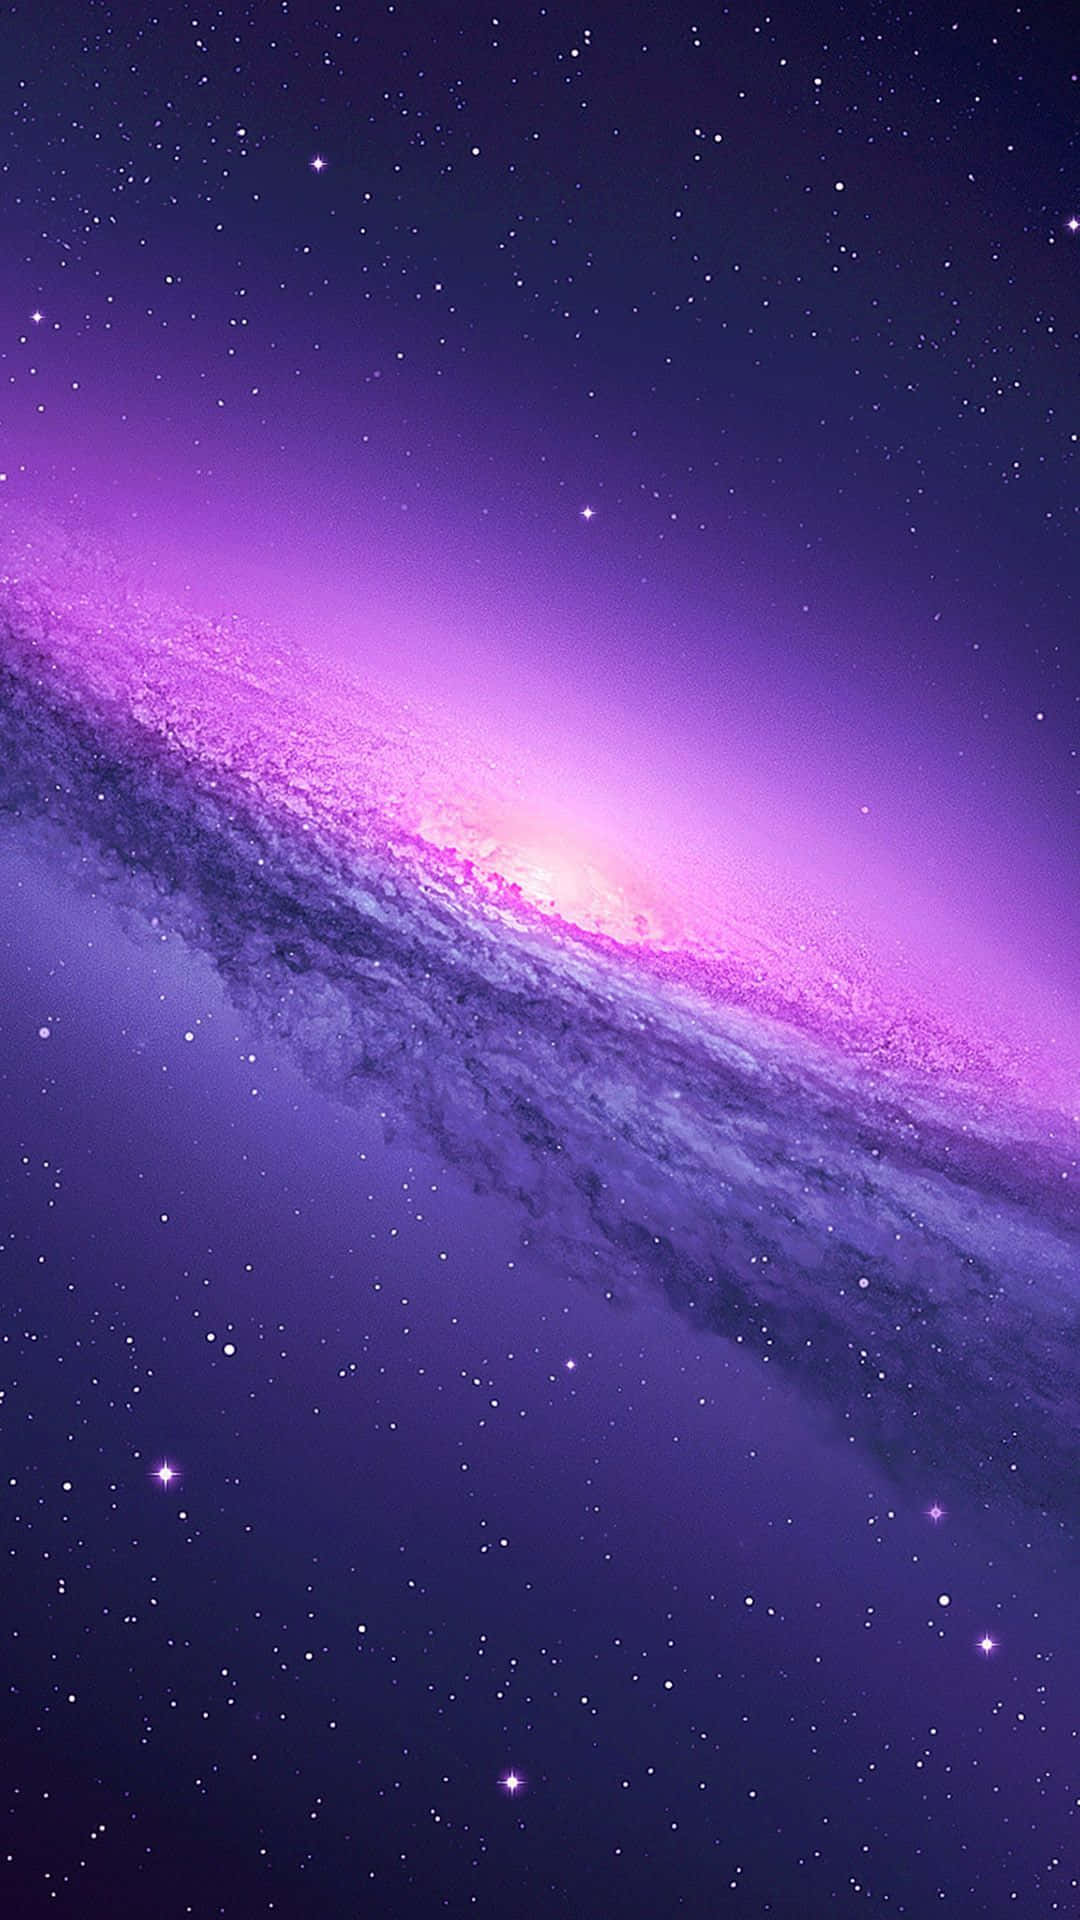 "Behold the majestic beauty of the Purple Galaxy"